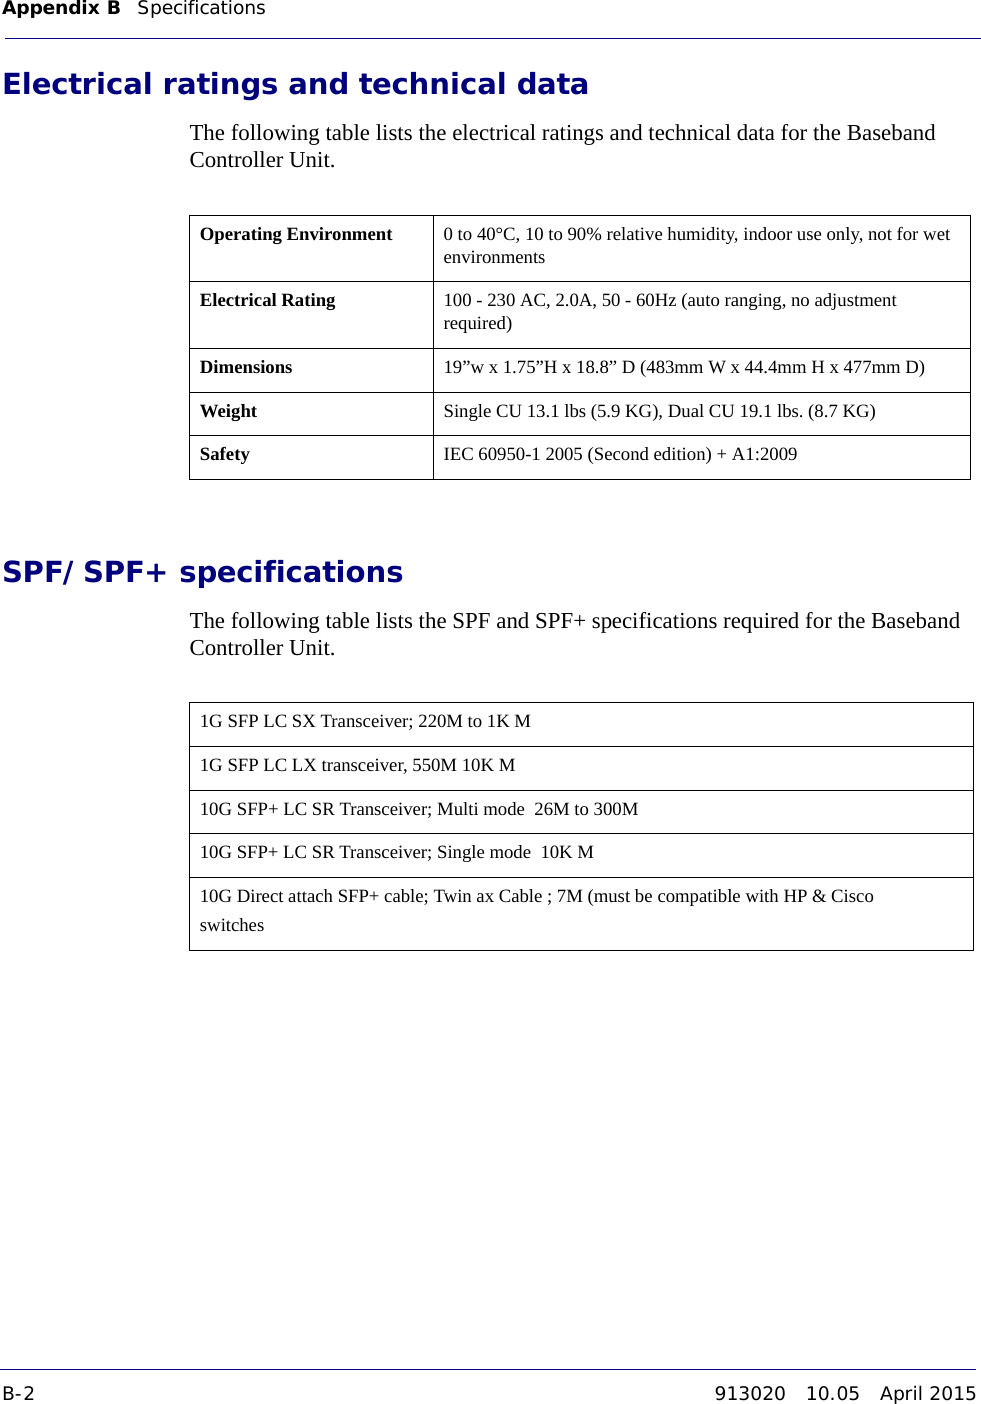 Appendix B Specifications B-2 913020 10.05 April 2015DRAFTElectrical ratings and technical dataThe following table lists the electrical ratings and technical data for the Baseband Controller Unit. SPF/SPF+ specificationsThe following table lists the SPF and SPF+ specifications required for the Baseband Controller Unit.Operating Environment 0 to 40°C, 10 to 90% relative humidity, indoor use only, not for wet environmentsElectrical Rating 100 - 230 AC, 2.0A, 50 - 60Hz (auto ranging, no adjustment required)Dimensions 19”w x 1.75”H x 18.8” D (483mm W x 44.4mm H x 477mm D)Weight Single CU 13.1 lbs (5.9 KG), Dual CU 19.1 lbs. (8.7 KG)Safety IEC 60950-1 2005 (Second edition) + A1:20091G SFP LC SX Transceiver; 220M to 1K M1G SFP LC LX transceiver, 550M 10K M10G SFP+ LC SR Transceiver; Multi mode  26M to 300M10G SFP+ LC SR Transceiver; Single mode  10K M10G Direct attach SFP+ cable; Twin ax Cable ; 7M (must be compatible with HP &amp; Cisco switches